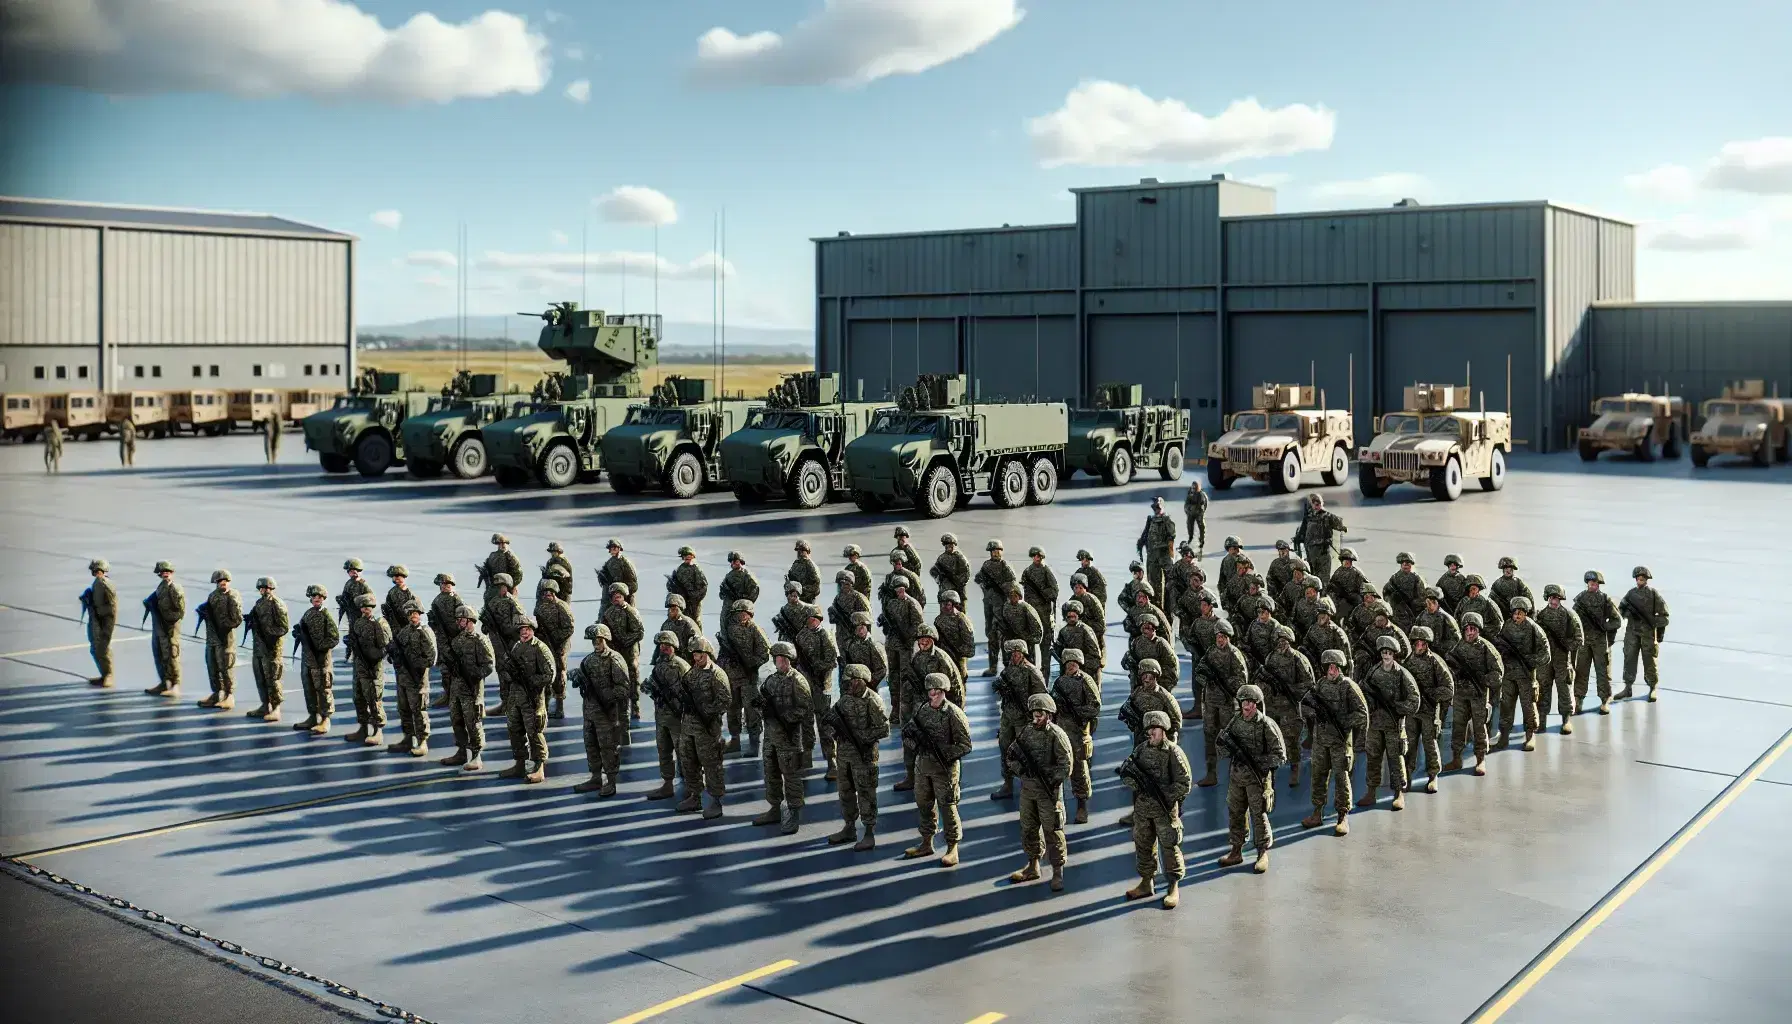 Diverse military personnel in camouflage stand at attention on a field with parked matte green vehicles, a secure building, and a jet overhead.